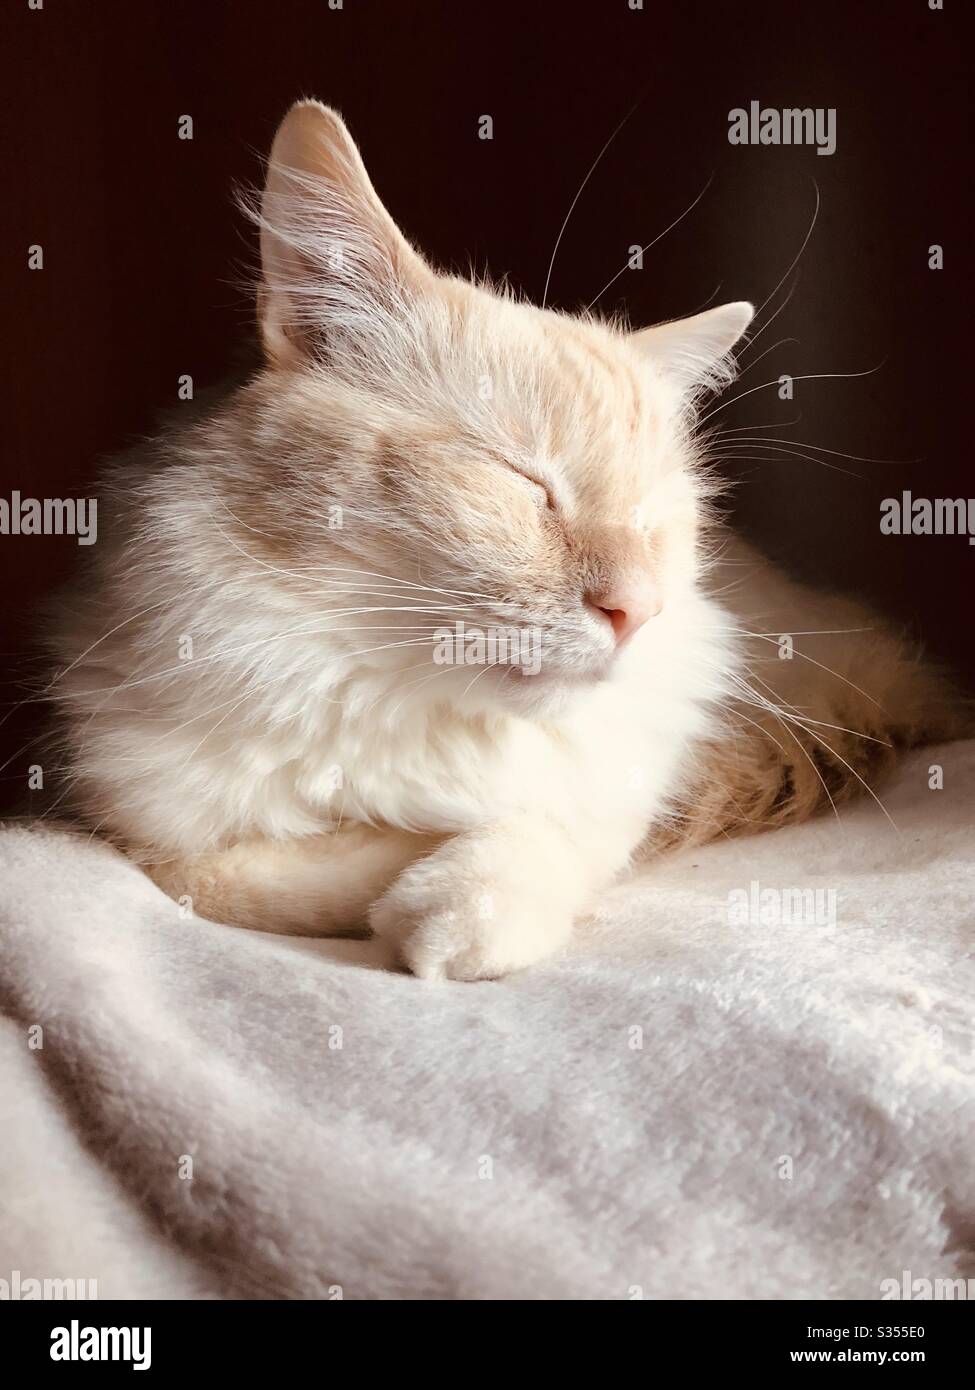 Fluffy flamepoint Siamese cat sleeping Stock Photo